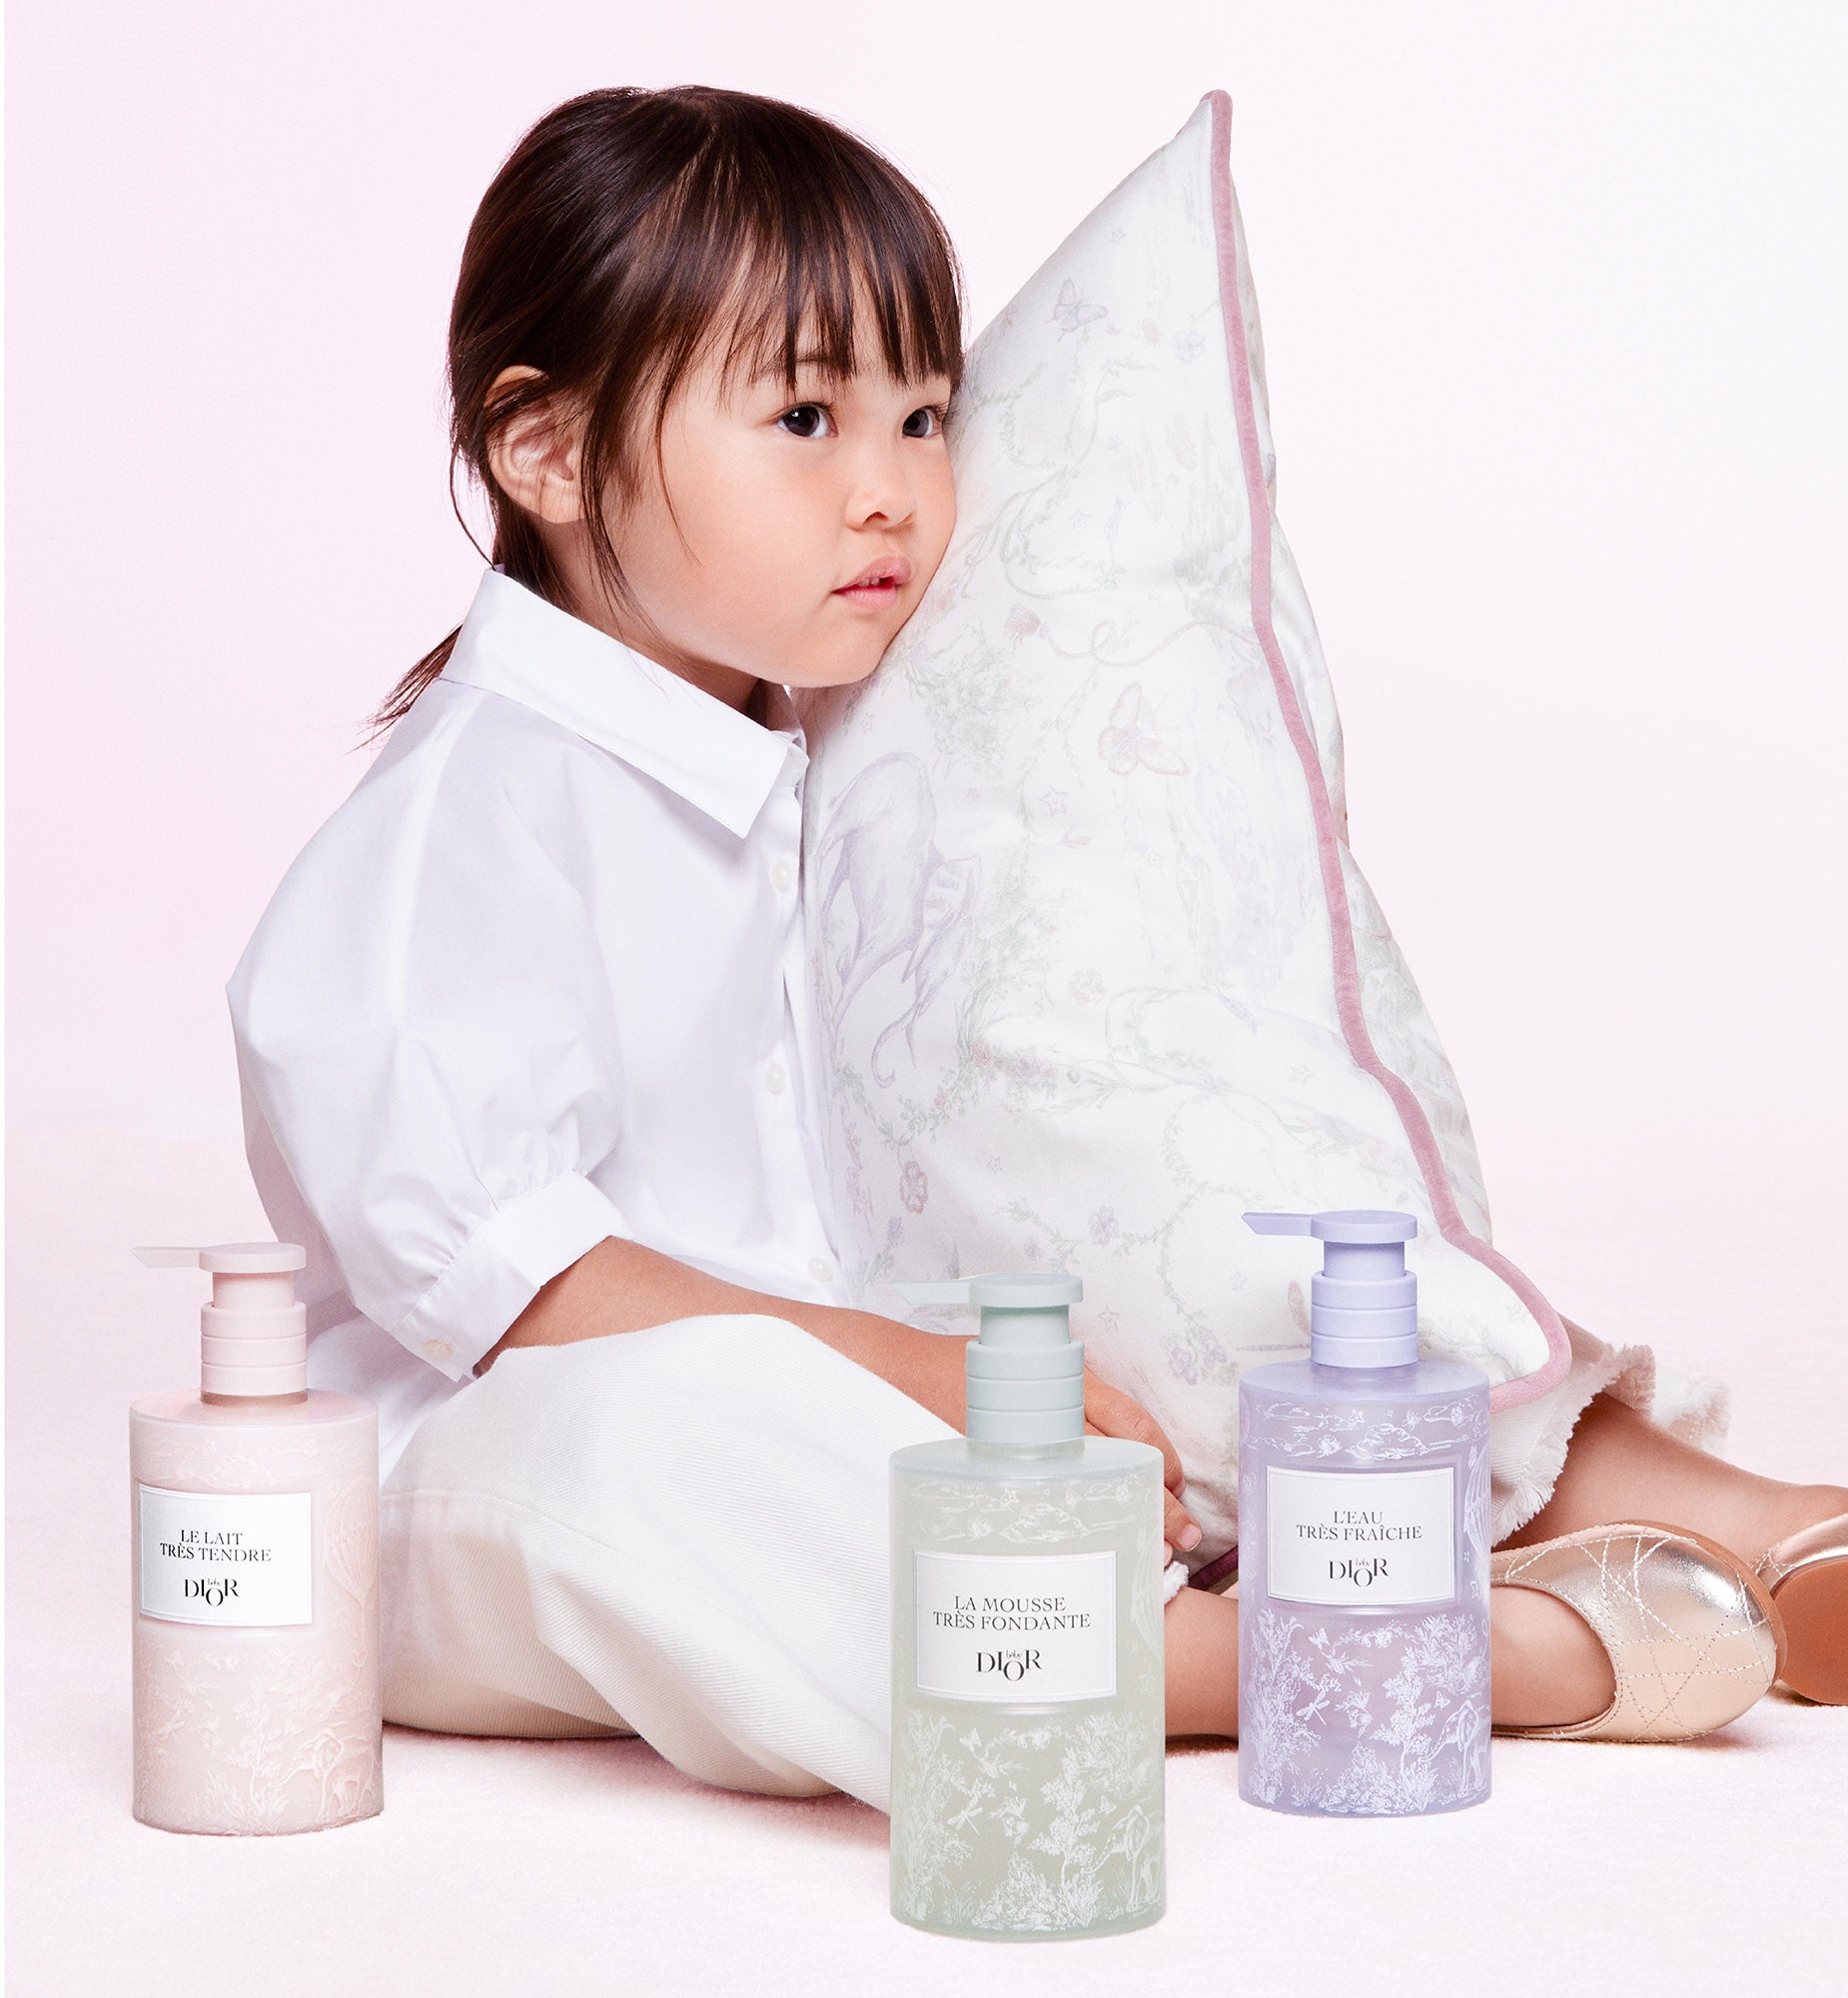 A picture of a little girl lying on a teddy bear blanket looking at Baby Dior baby care.